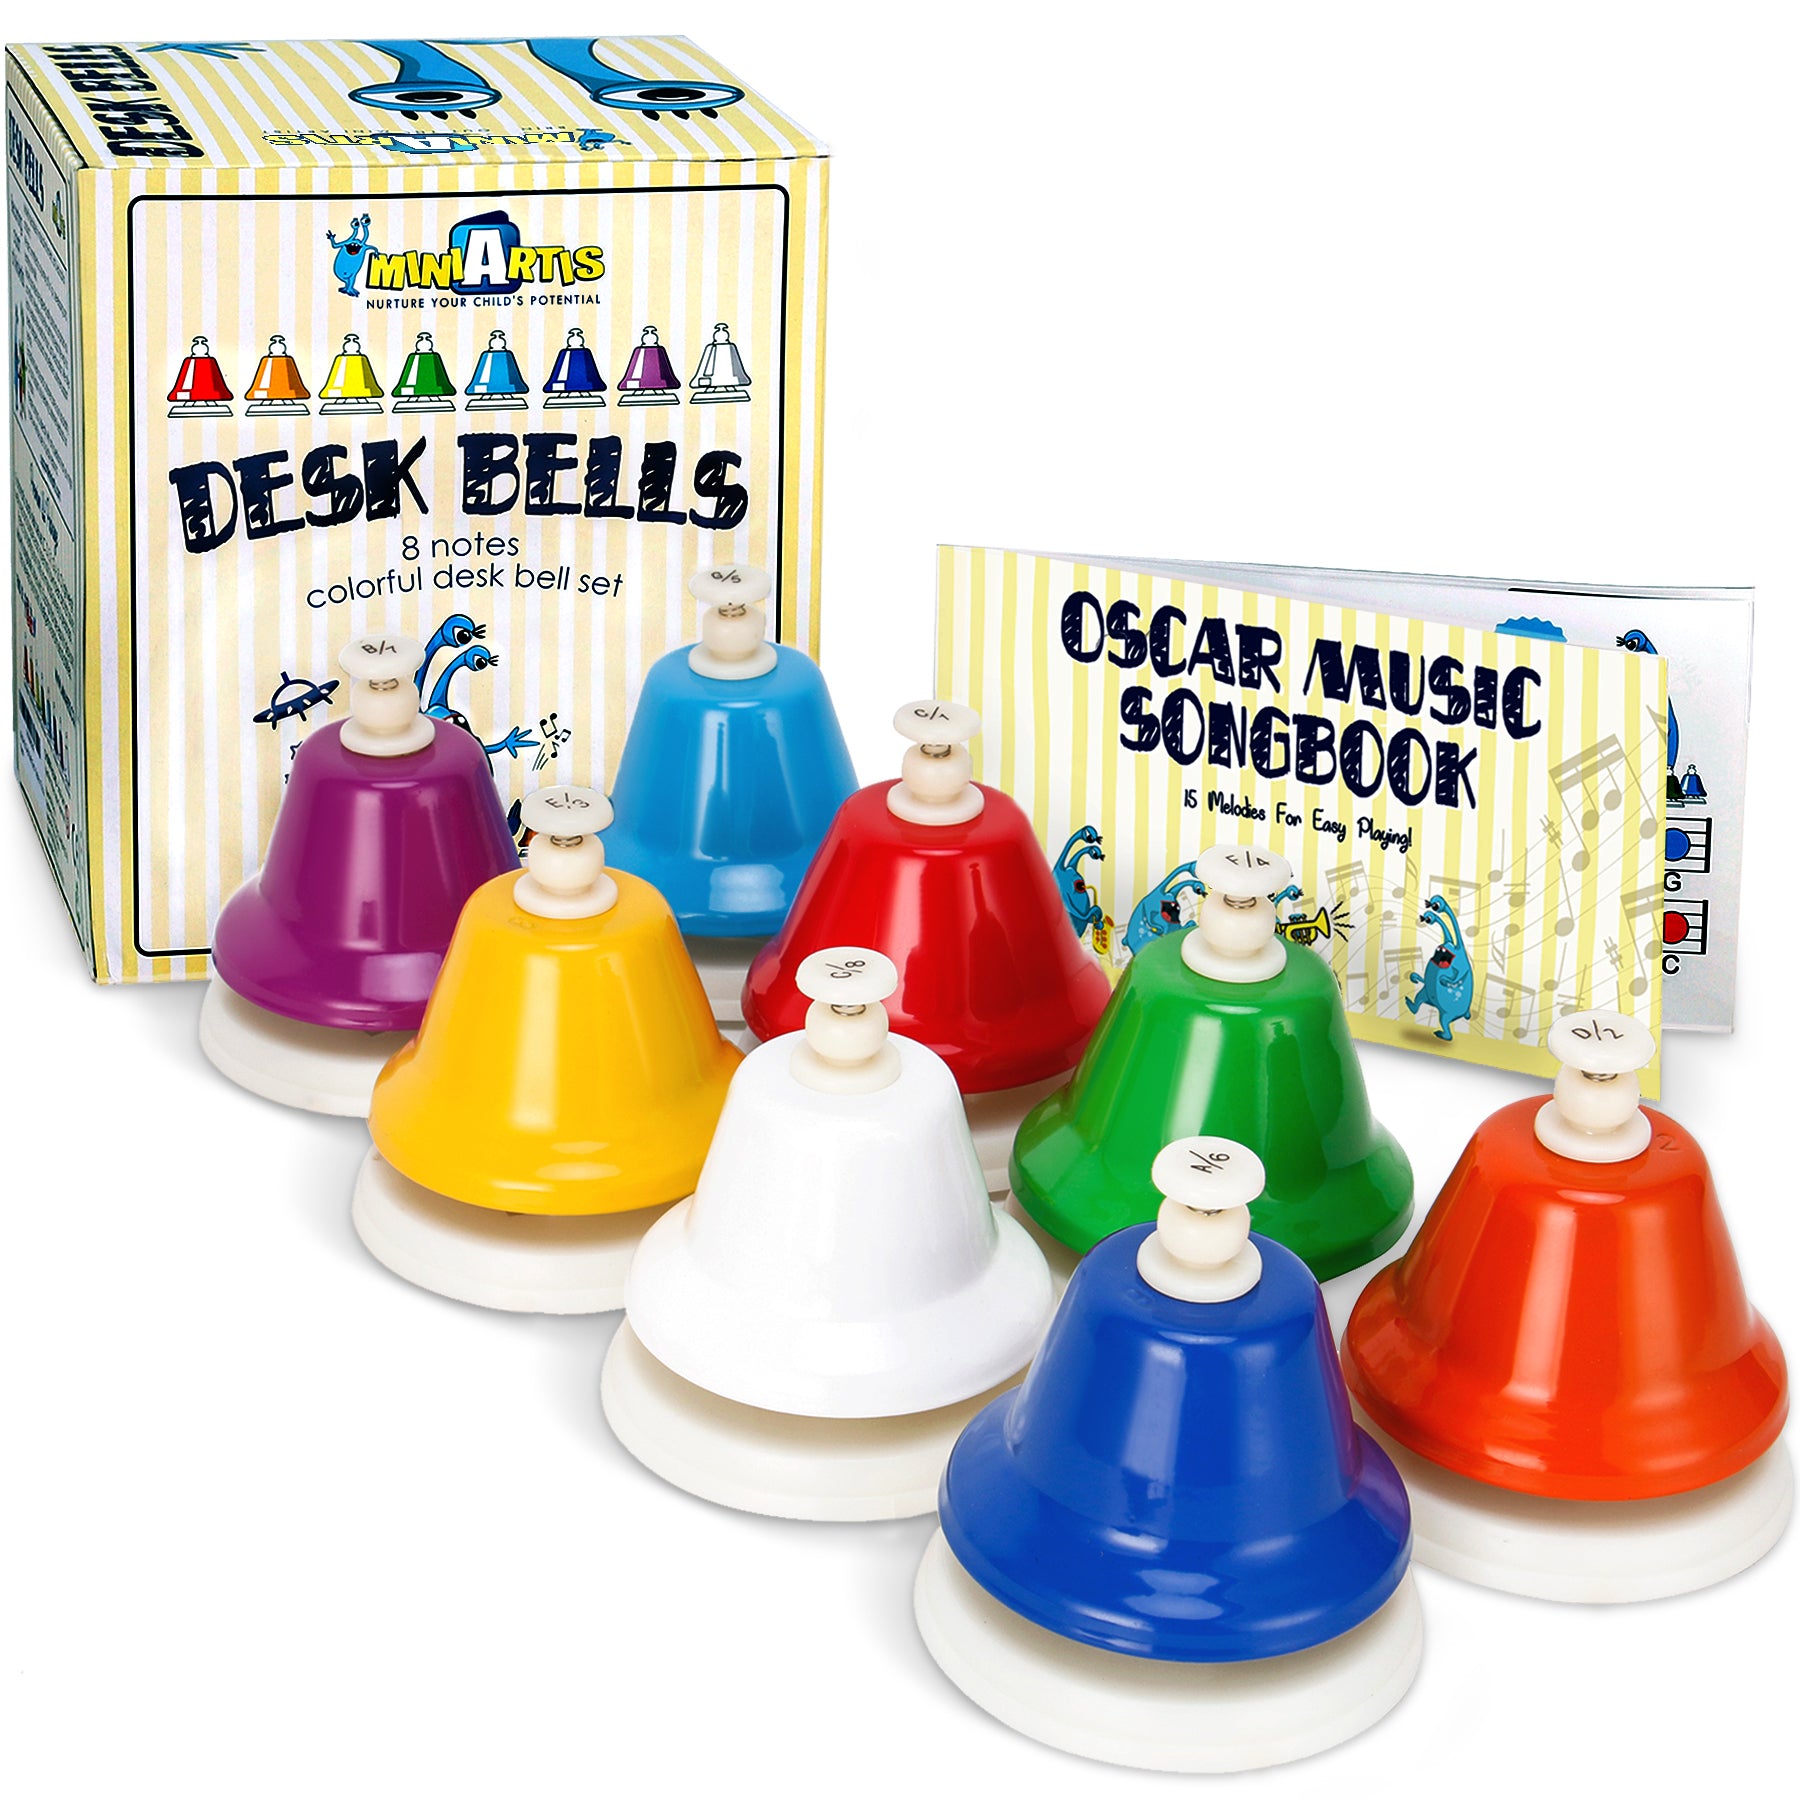 Desk Bells for Kids Educational Music Toys for Toddlers 8 Notes Colorful Bells Set Great Birthday Gift for Children